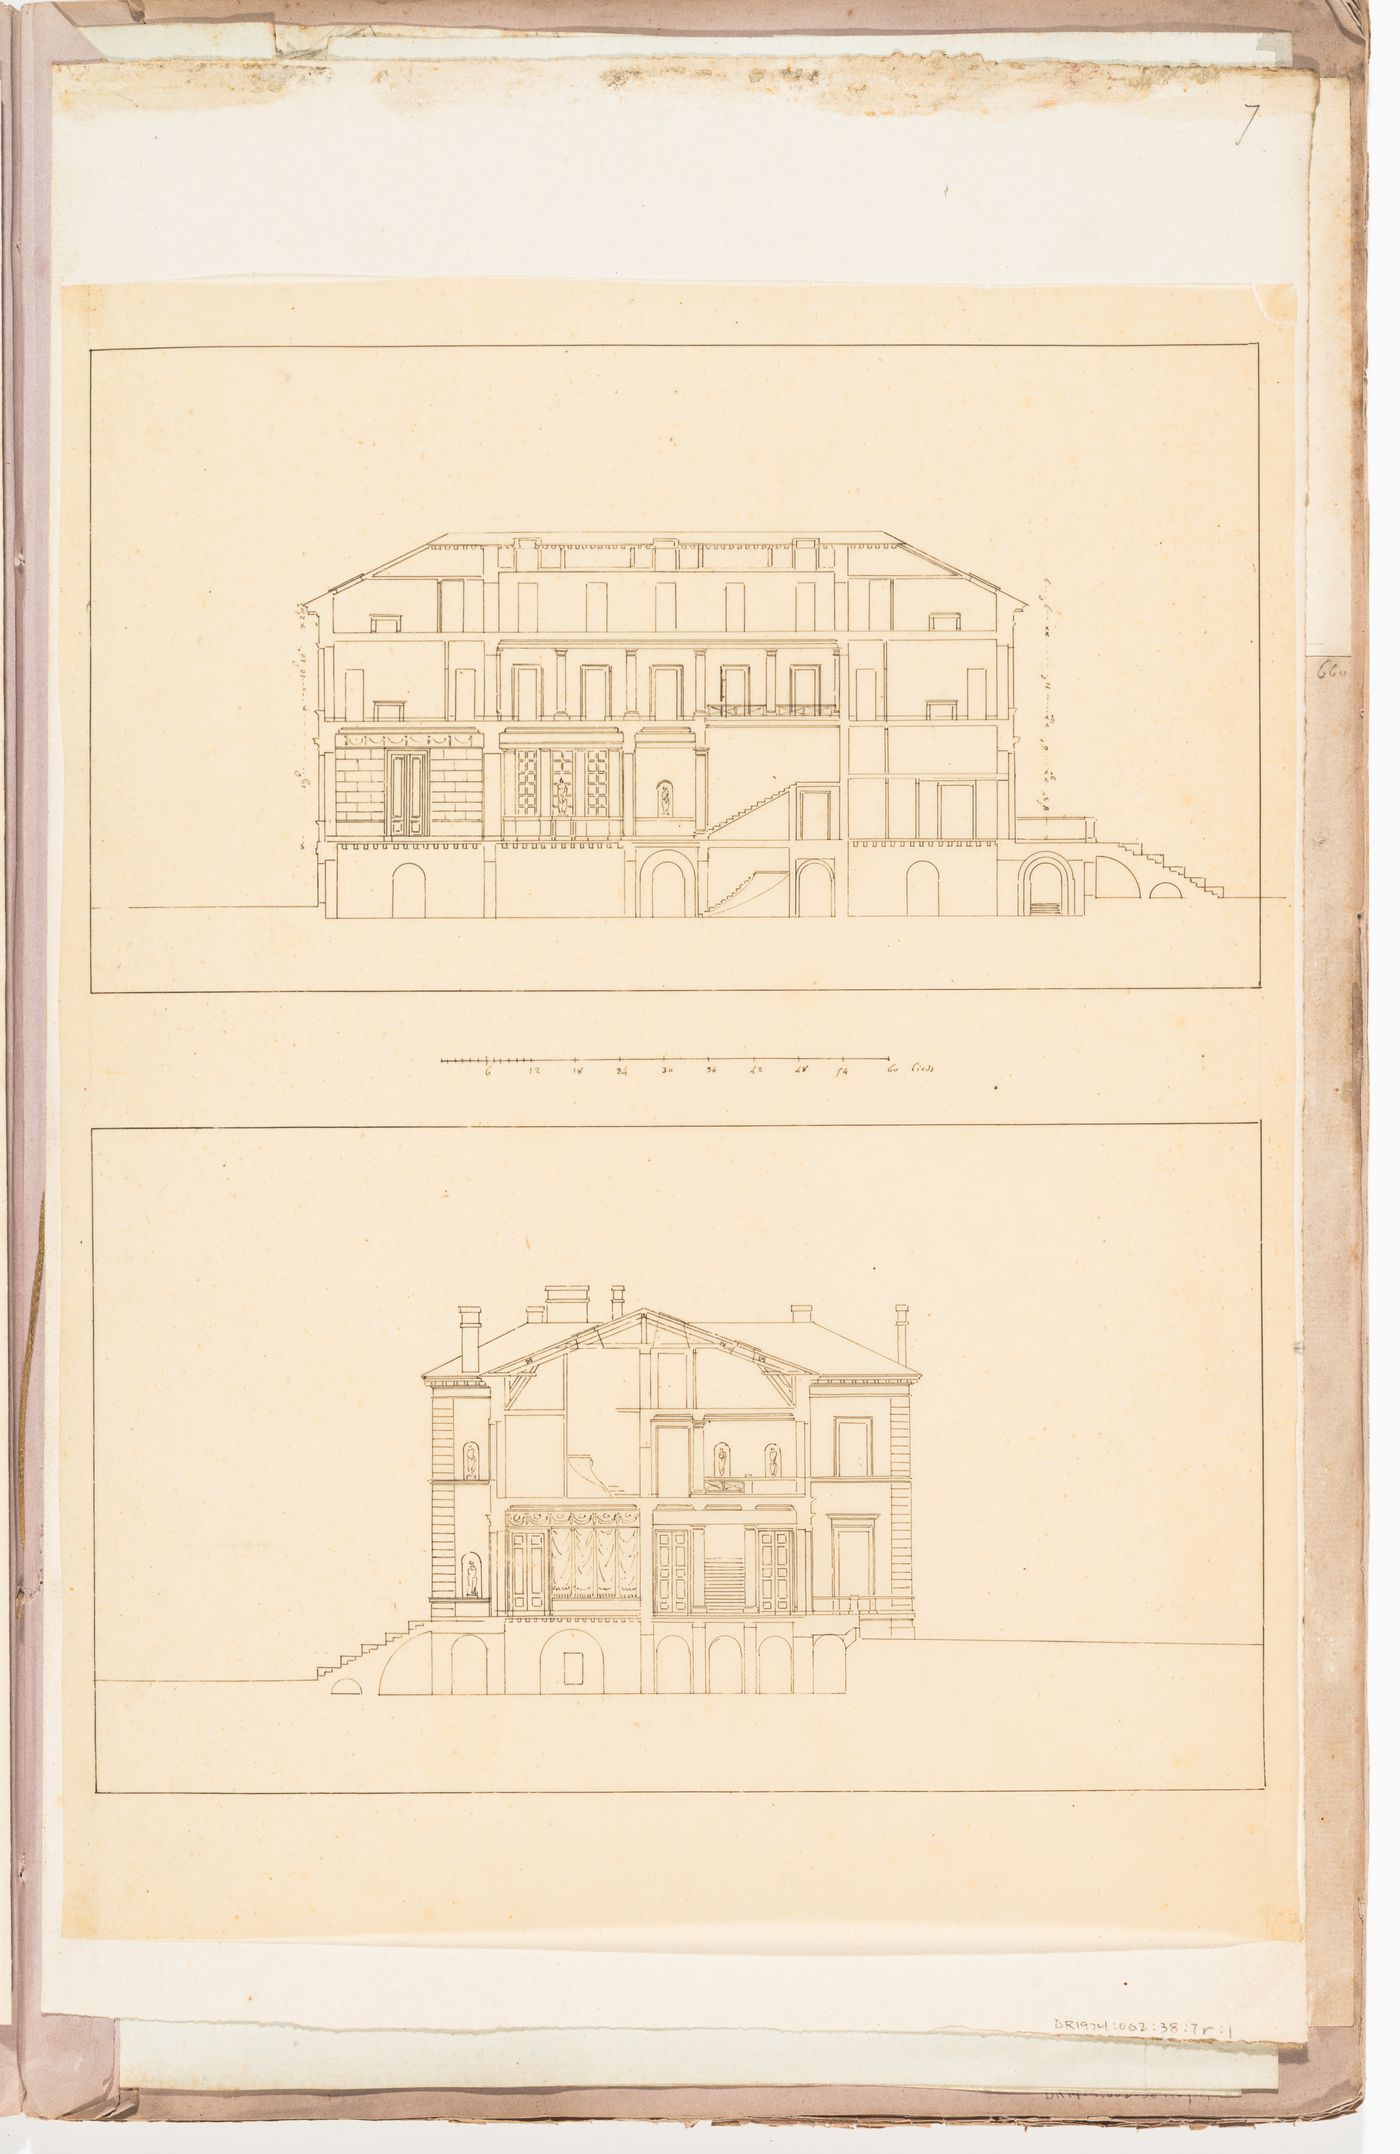 Sections for a country house for duc Decazes, Grave; verso: Side elevation for a country house for duc Decazes, Grave